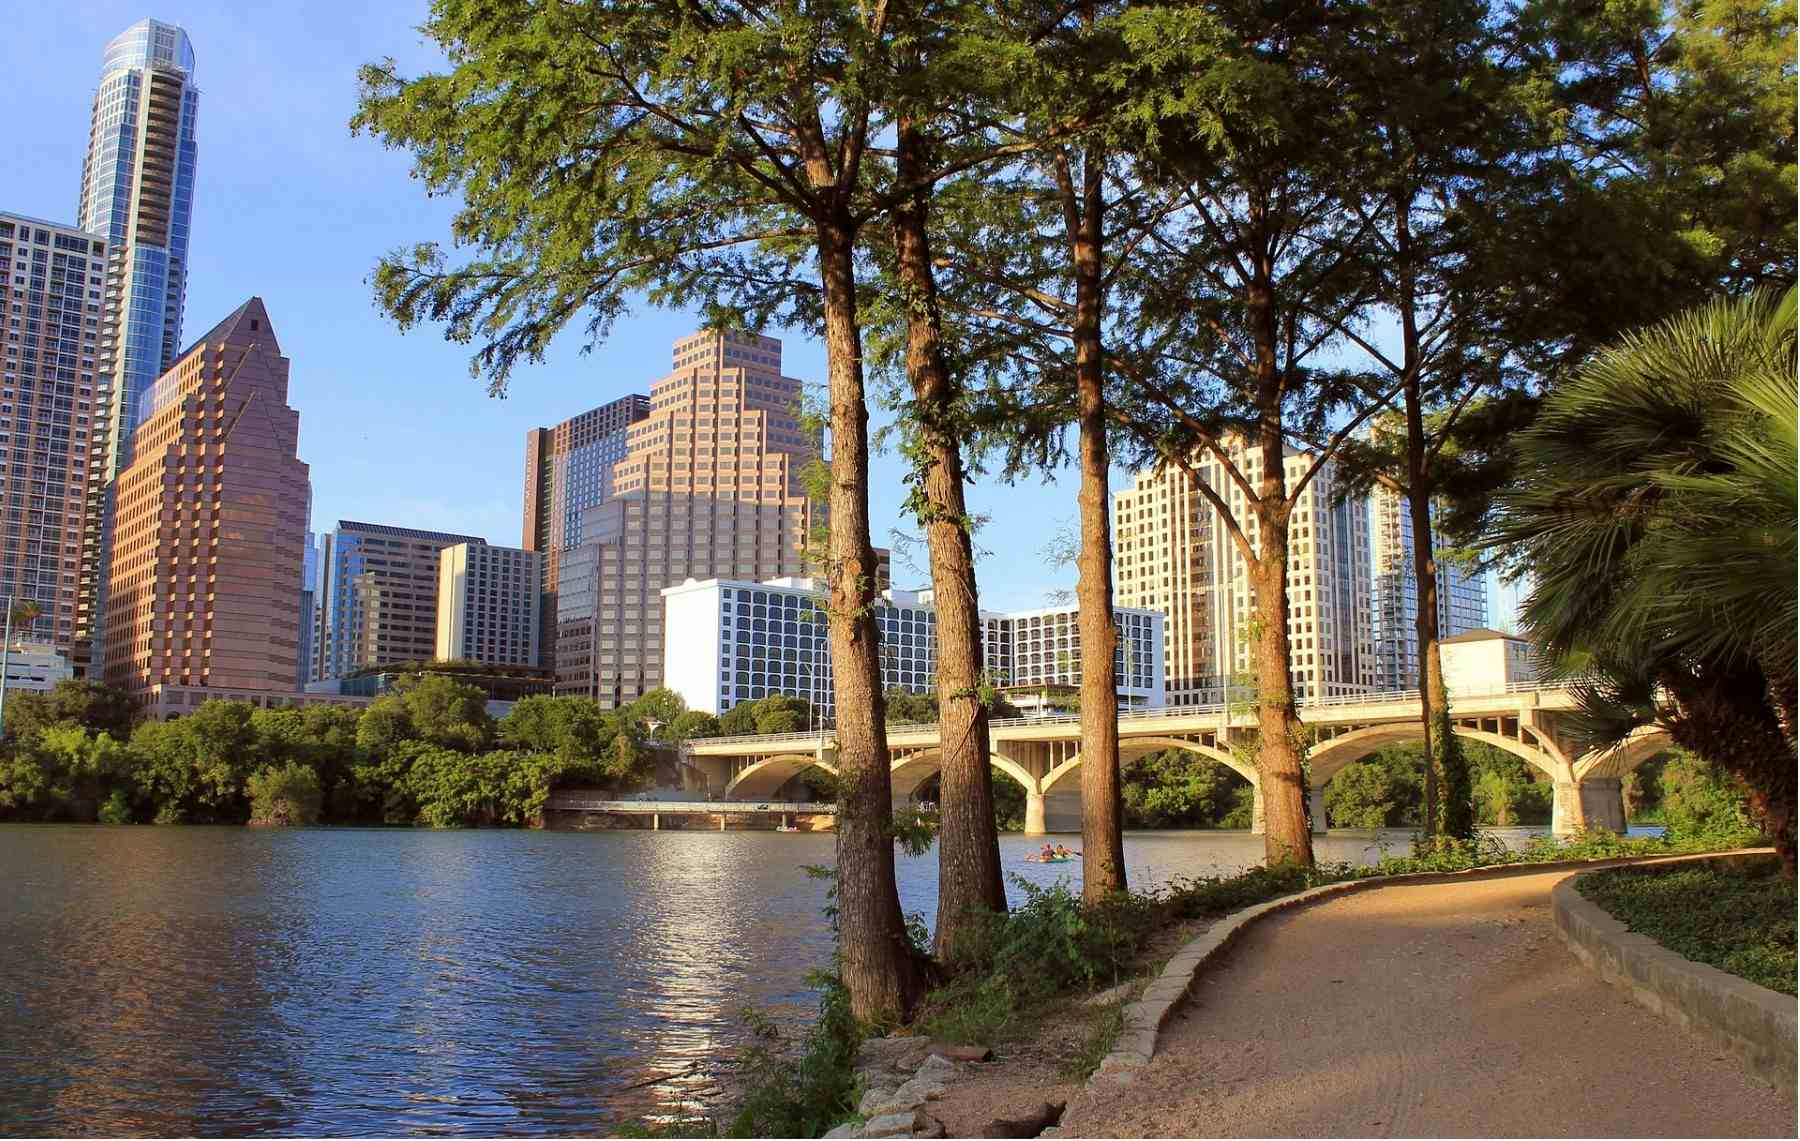 Shore of Lady Bird Lake in the city